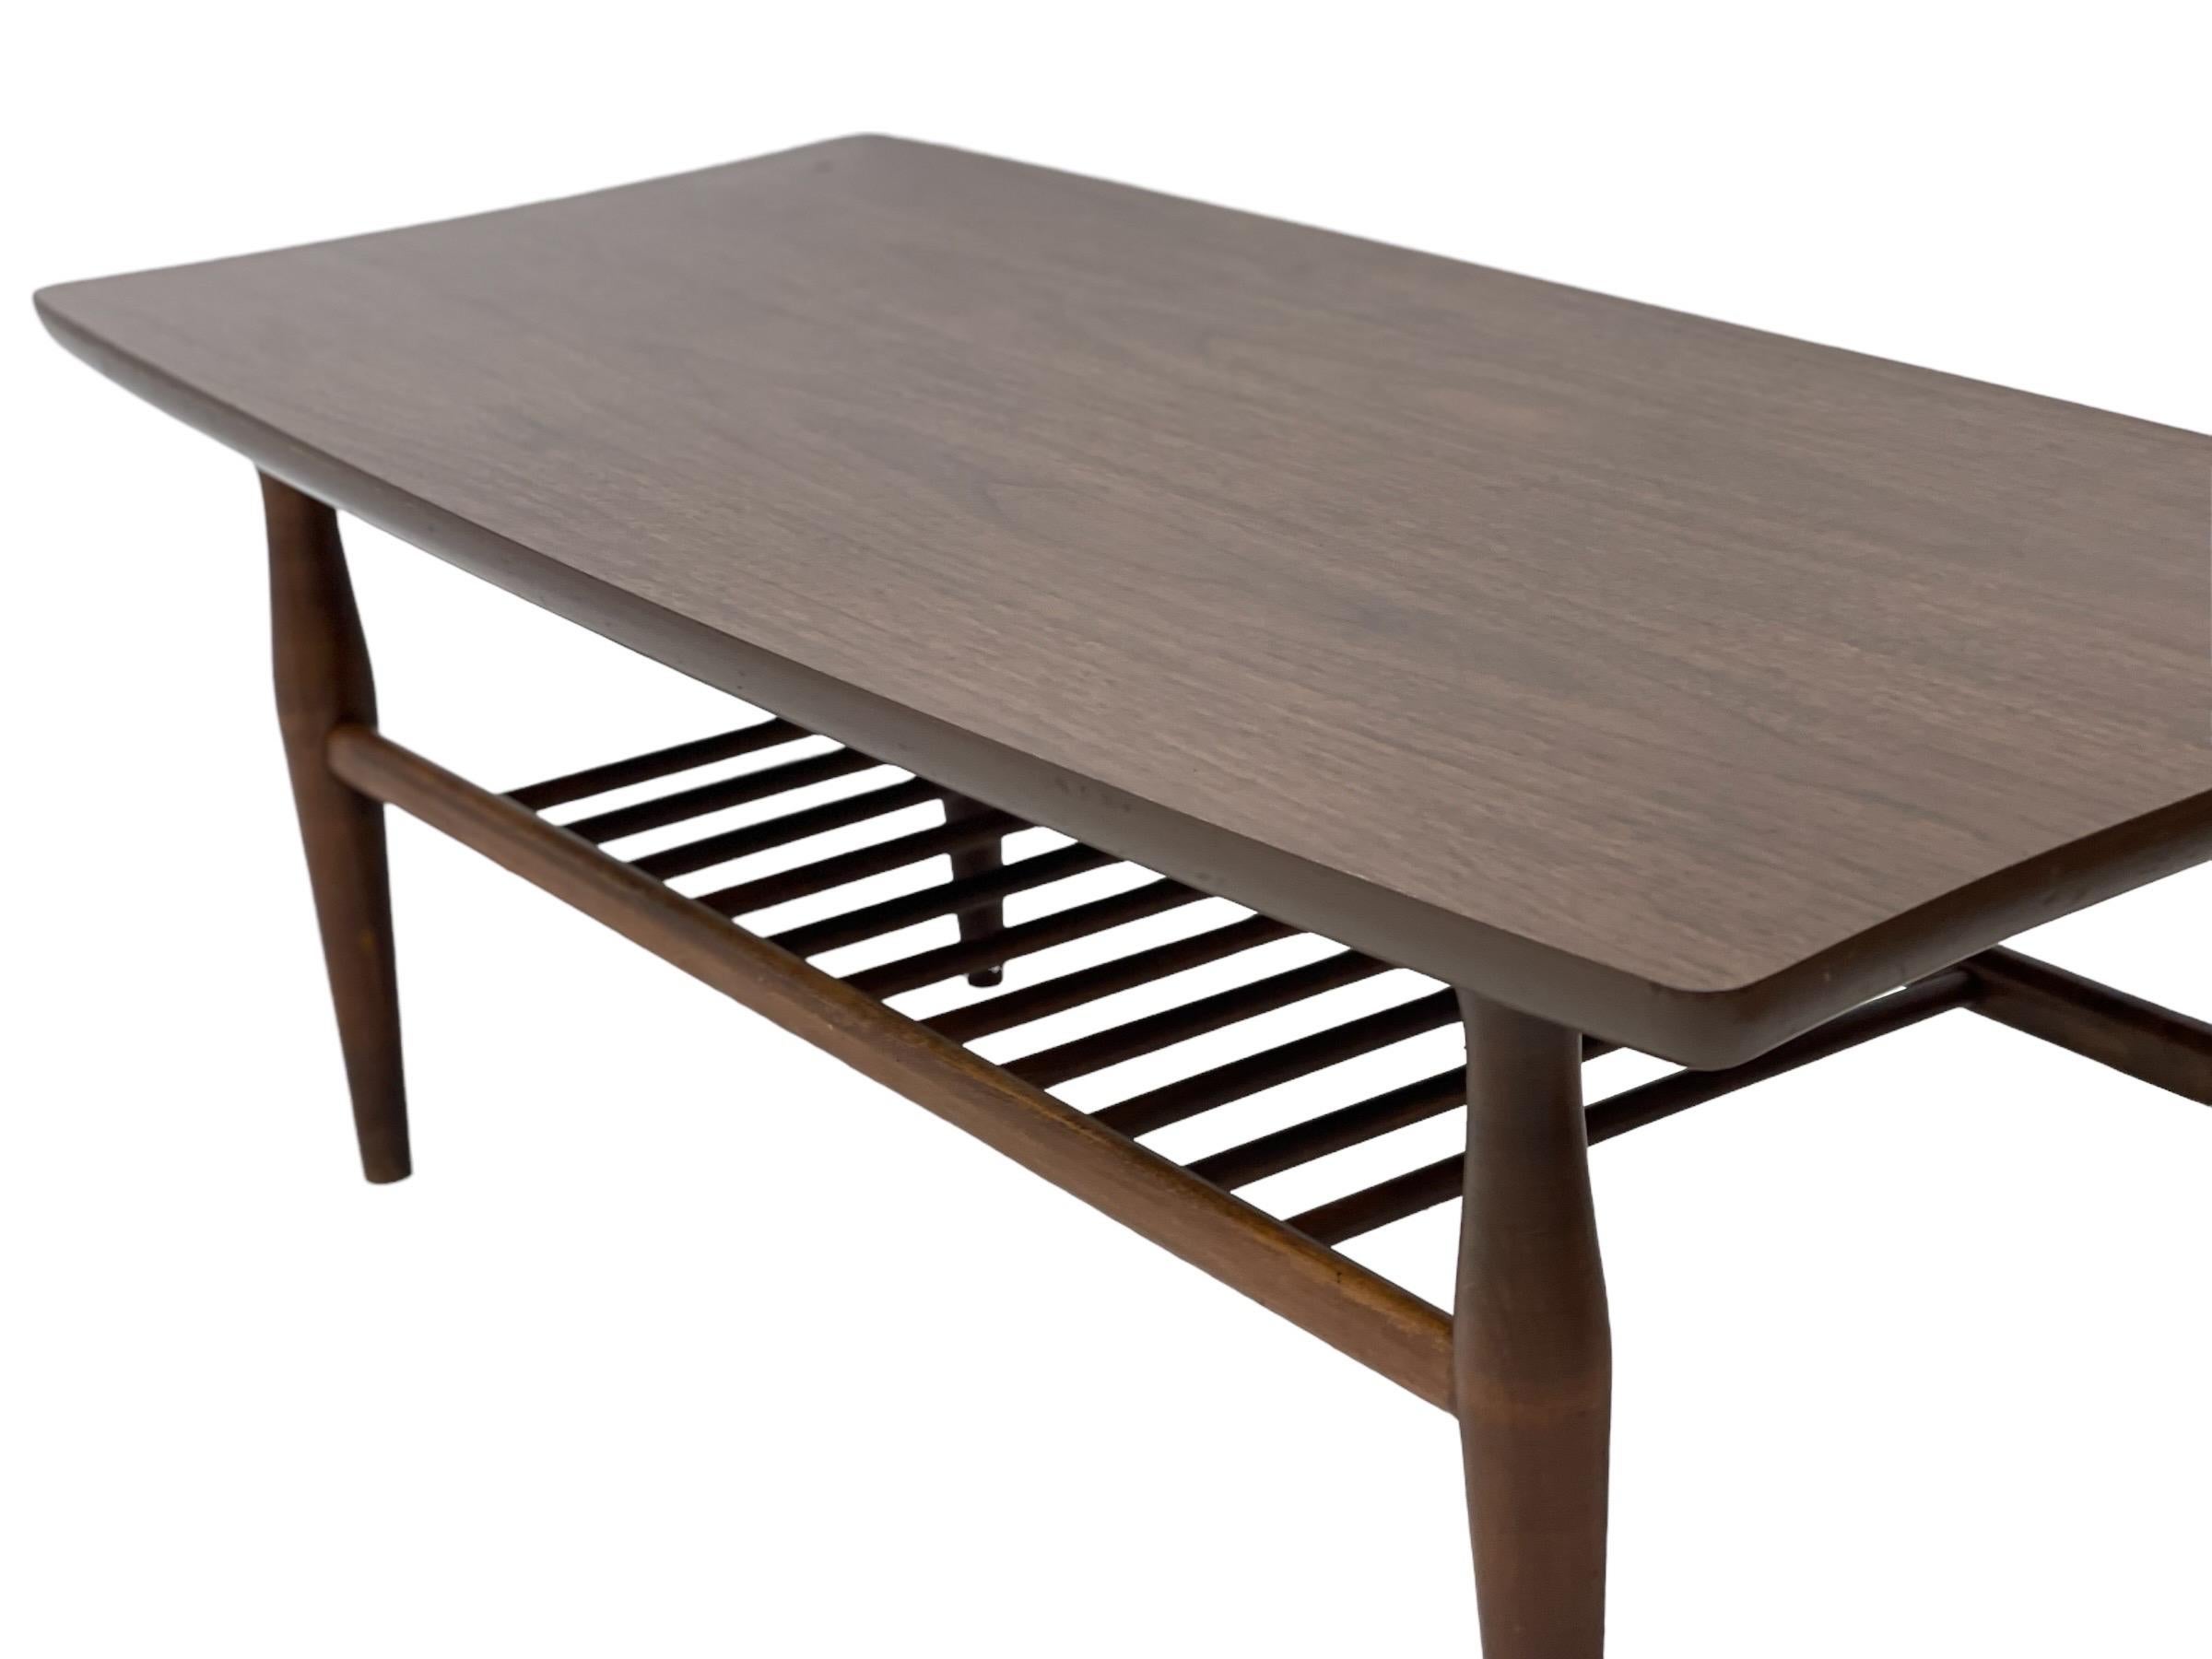 Mid-20th Century Vintage Mid-Century Modern Walnut Coffee Table with Shelf For Sale